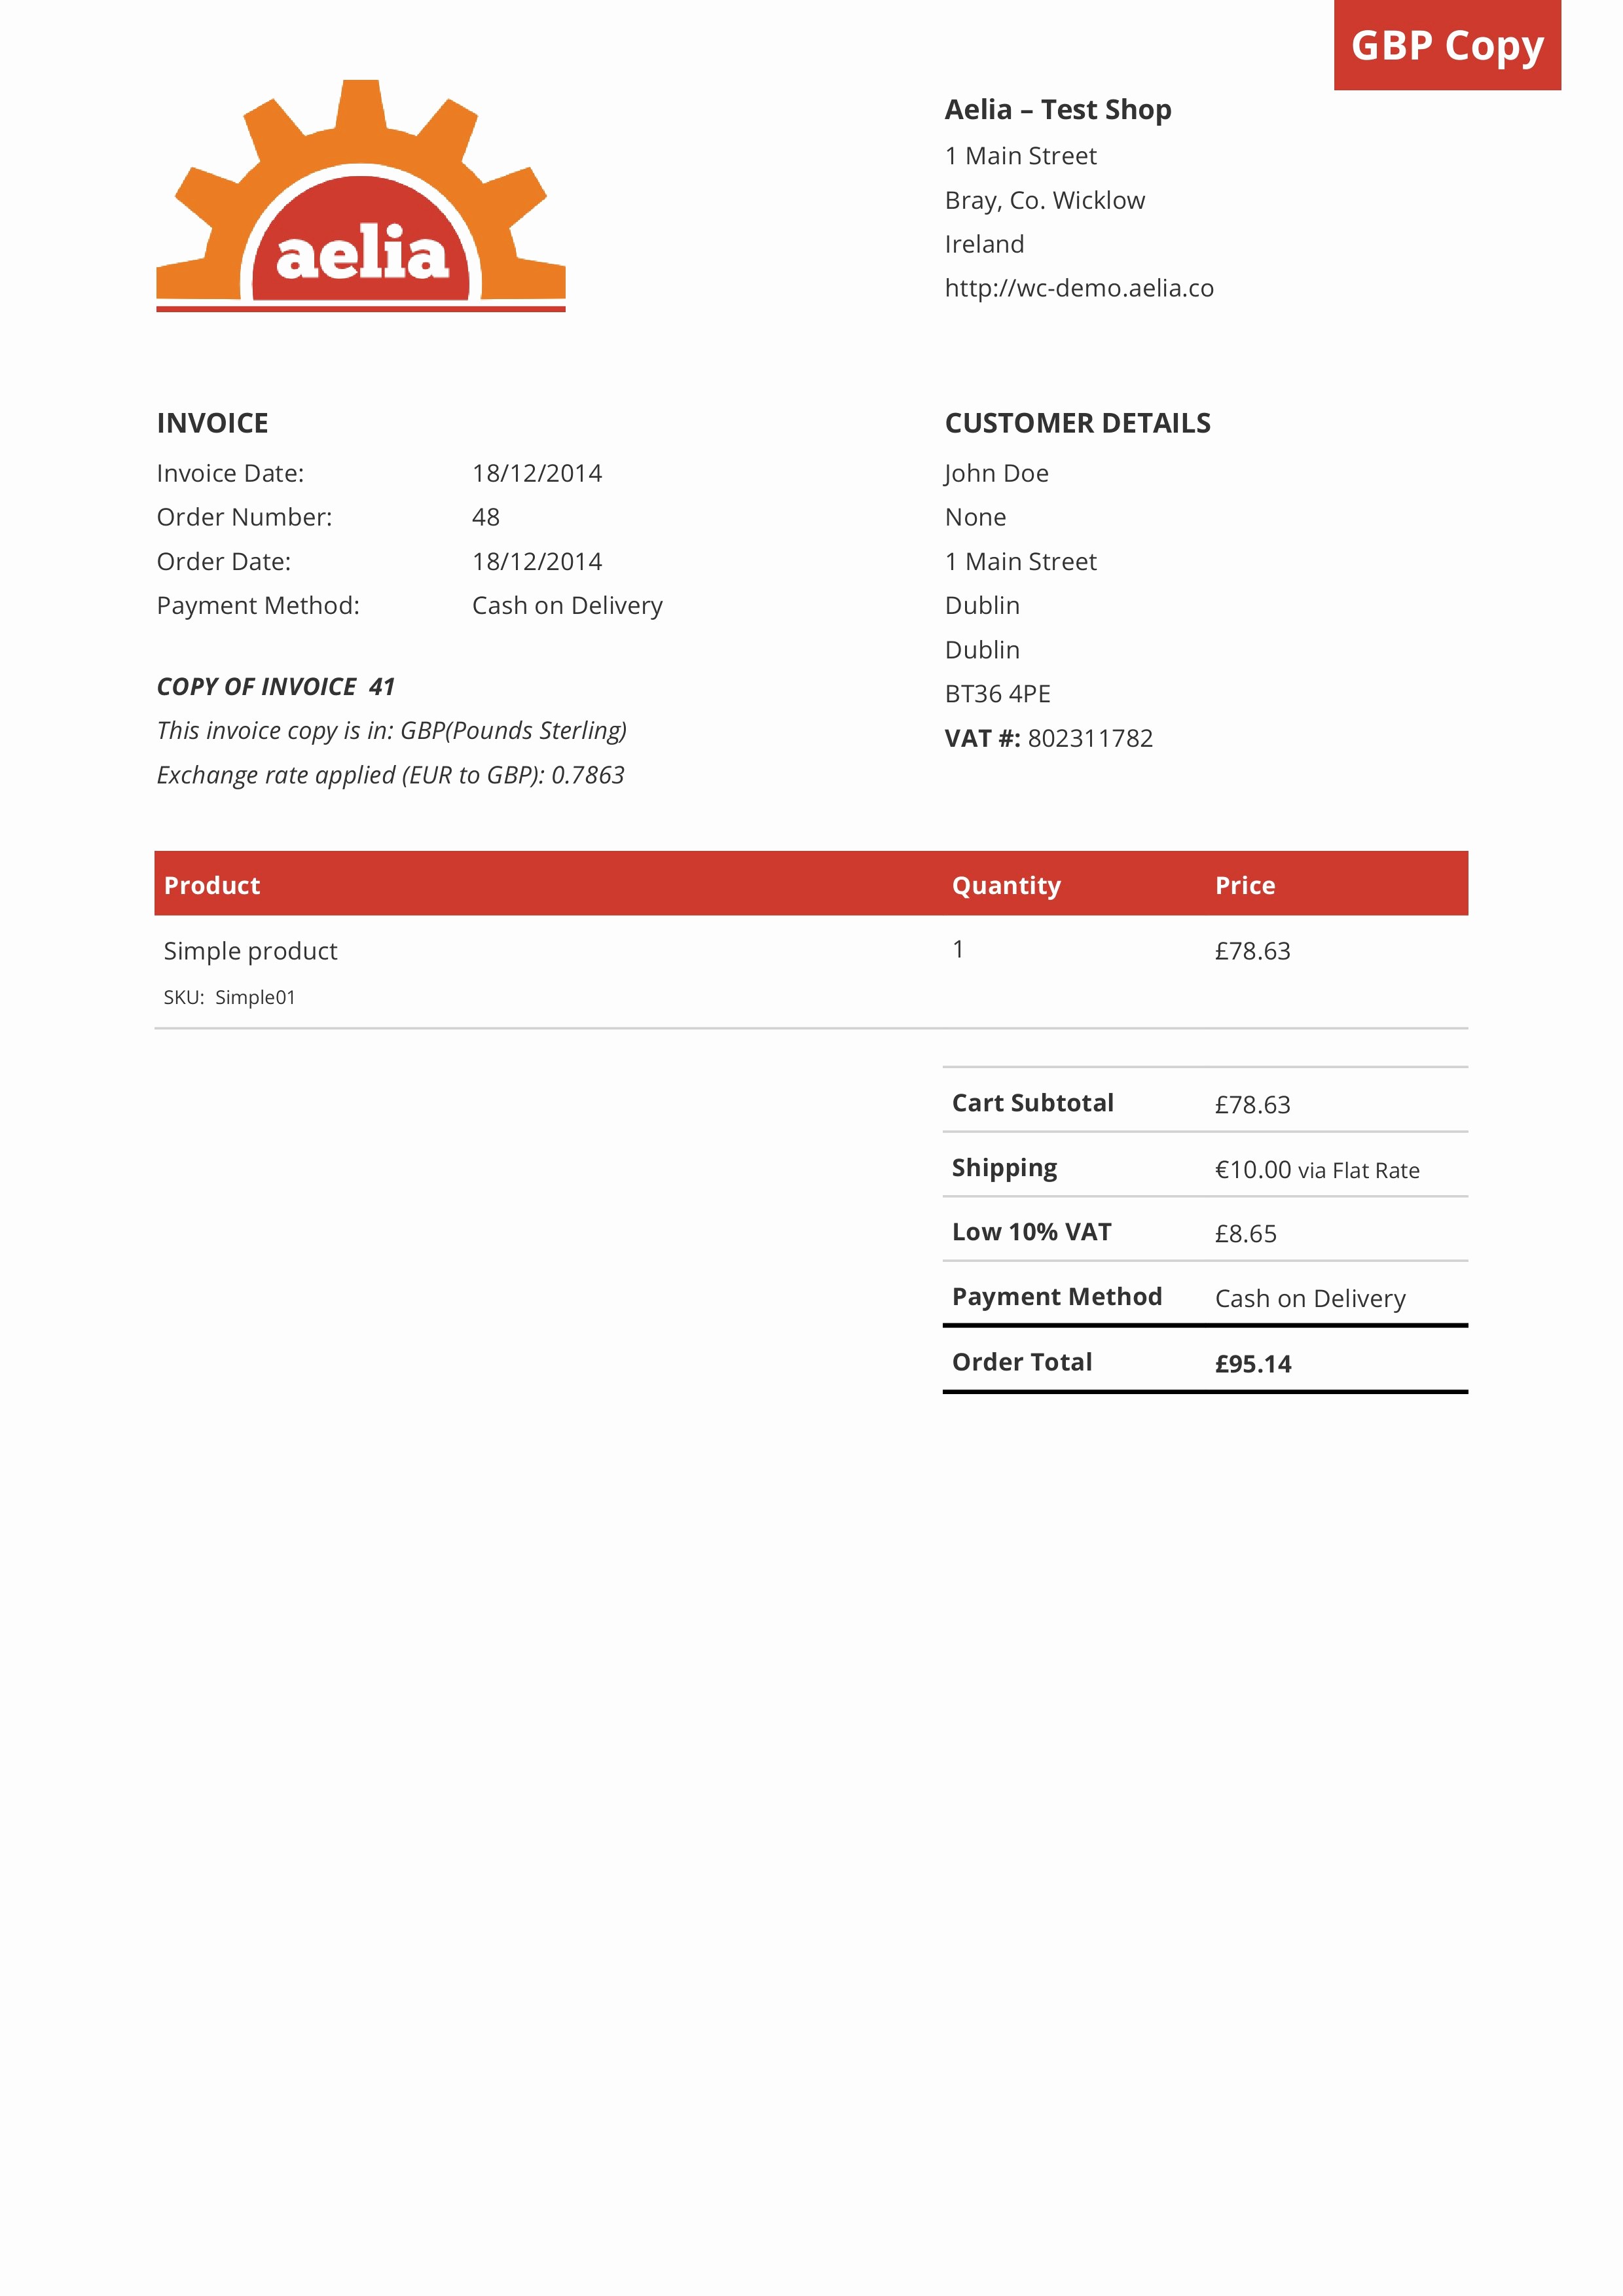 Copy Of An Invoice Template Luxury Invoice Copy Sample